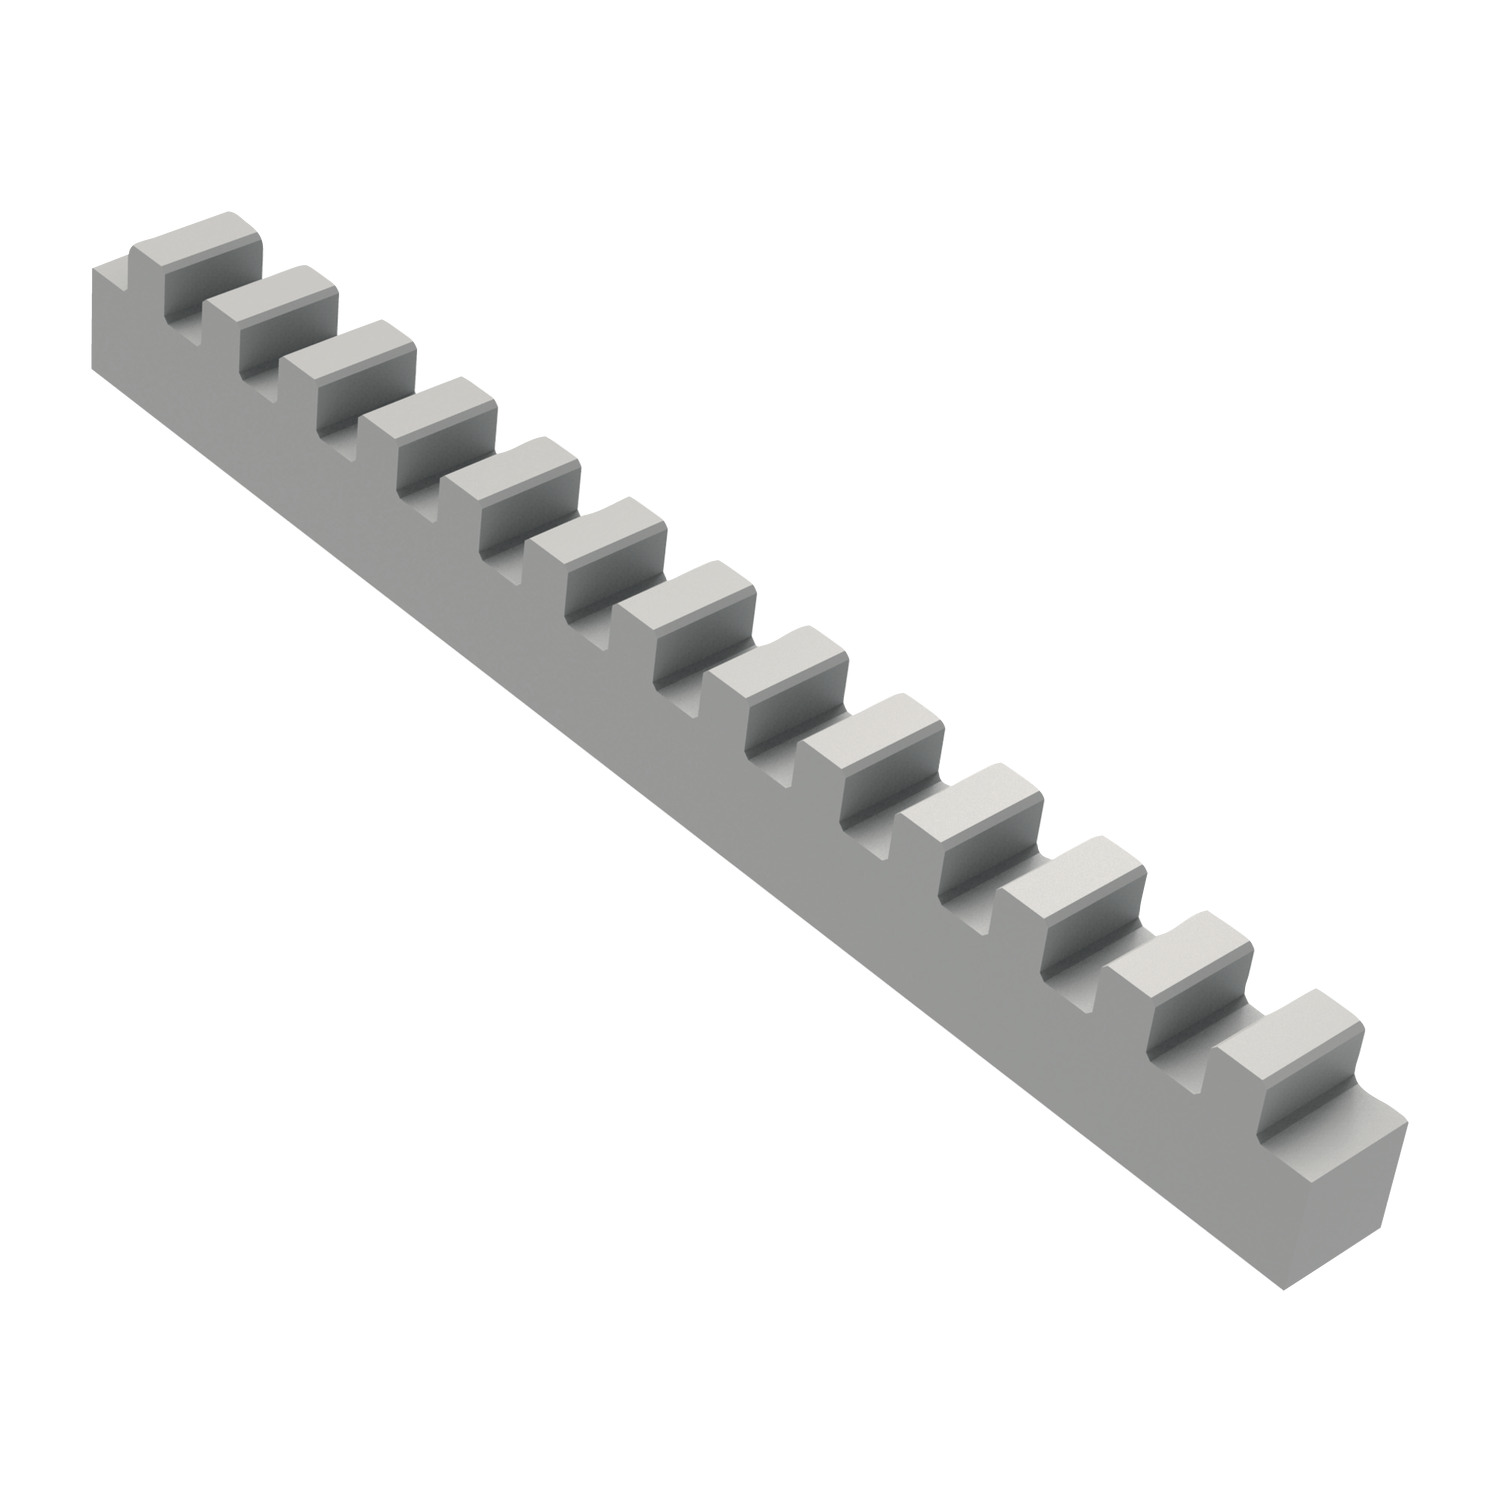 Toothed Rack - Module 0,5 to 1,0 Plastic toothed rack for use with Rotary Dampers, part numbers Q3000 to Q3060.